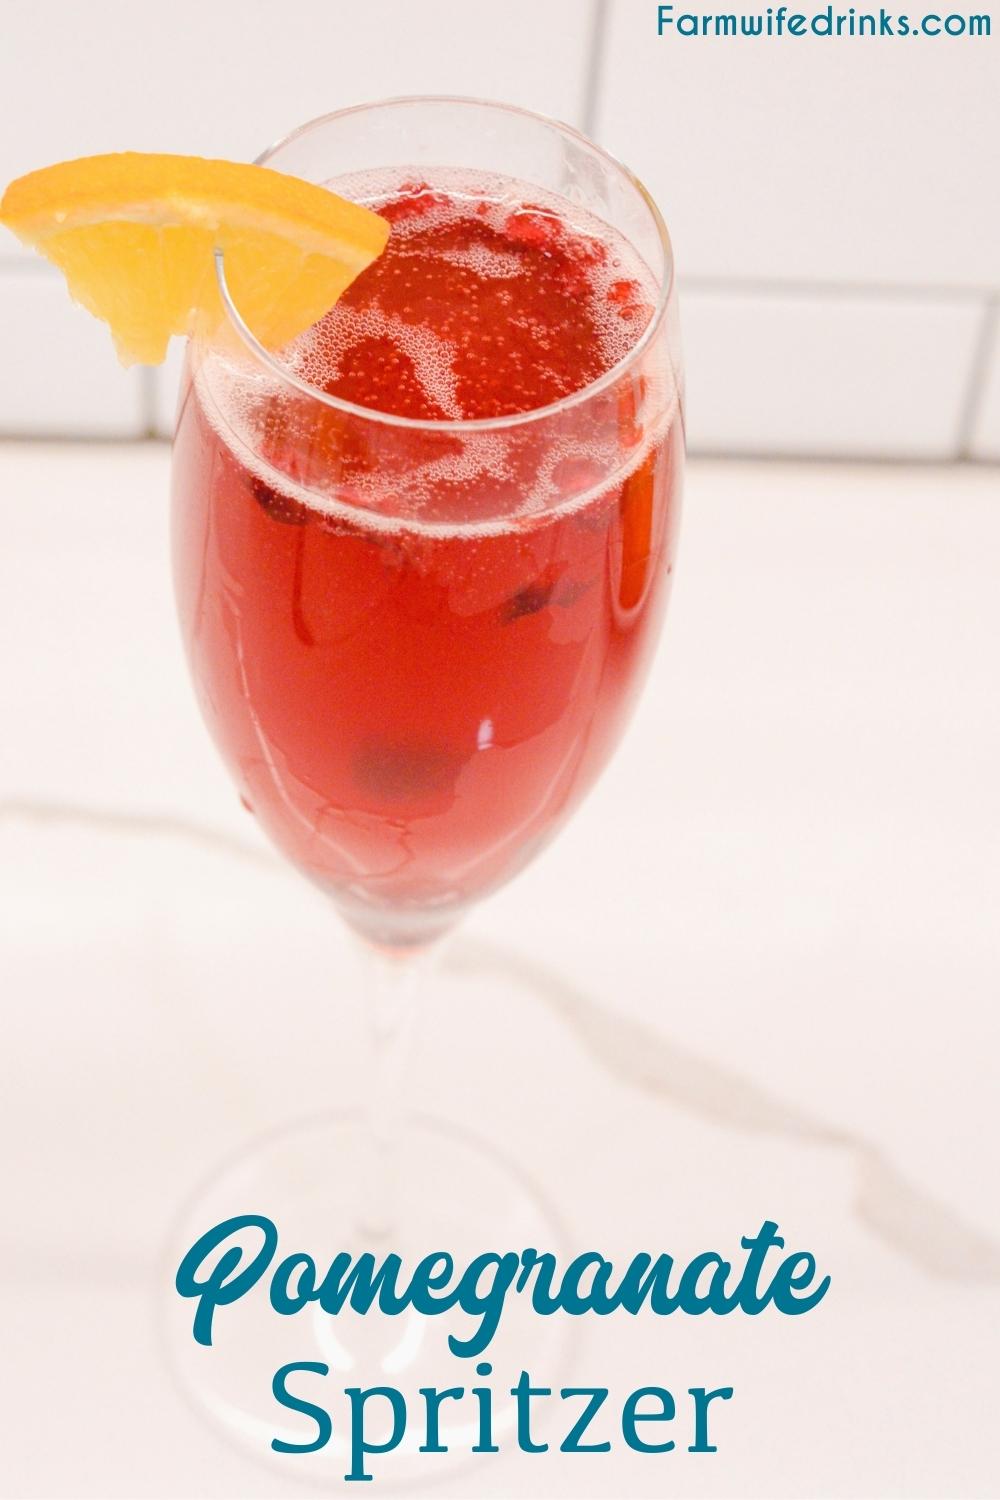 The pomegranate spritzer combines your favorite champagne, prosecco, cava, or sparkling wine with fresh-squeezed orange juice, pomegranate juice, and the bubbly. Garnish the fancy champagne cocktail with pomegranate arils and an orange slice. 